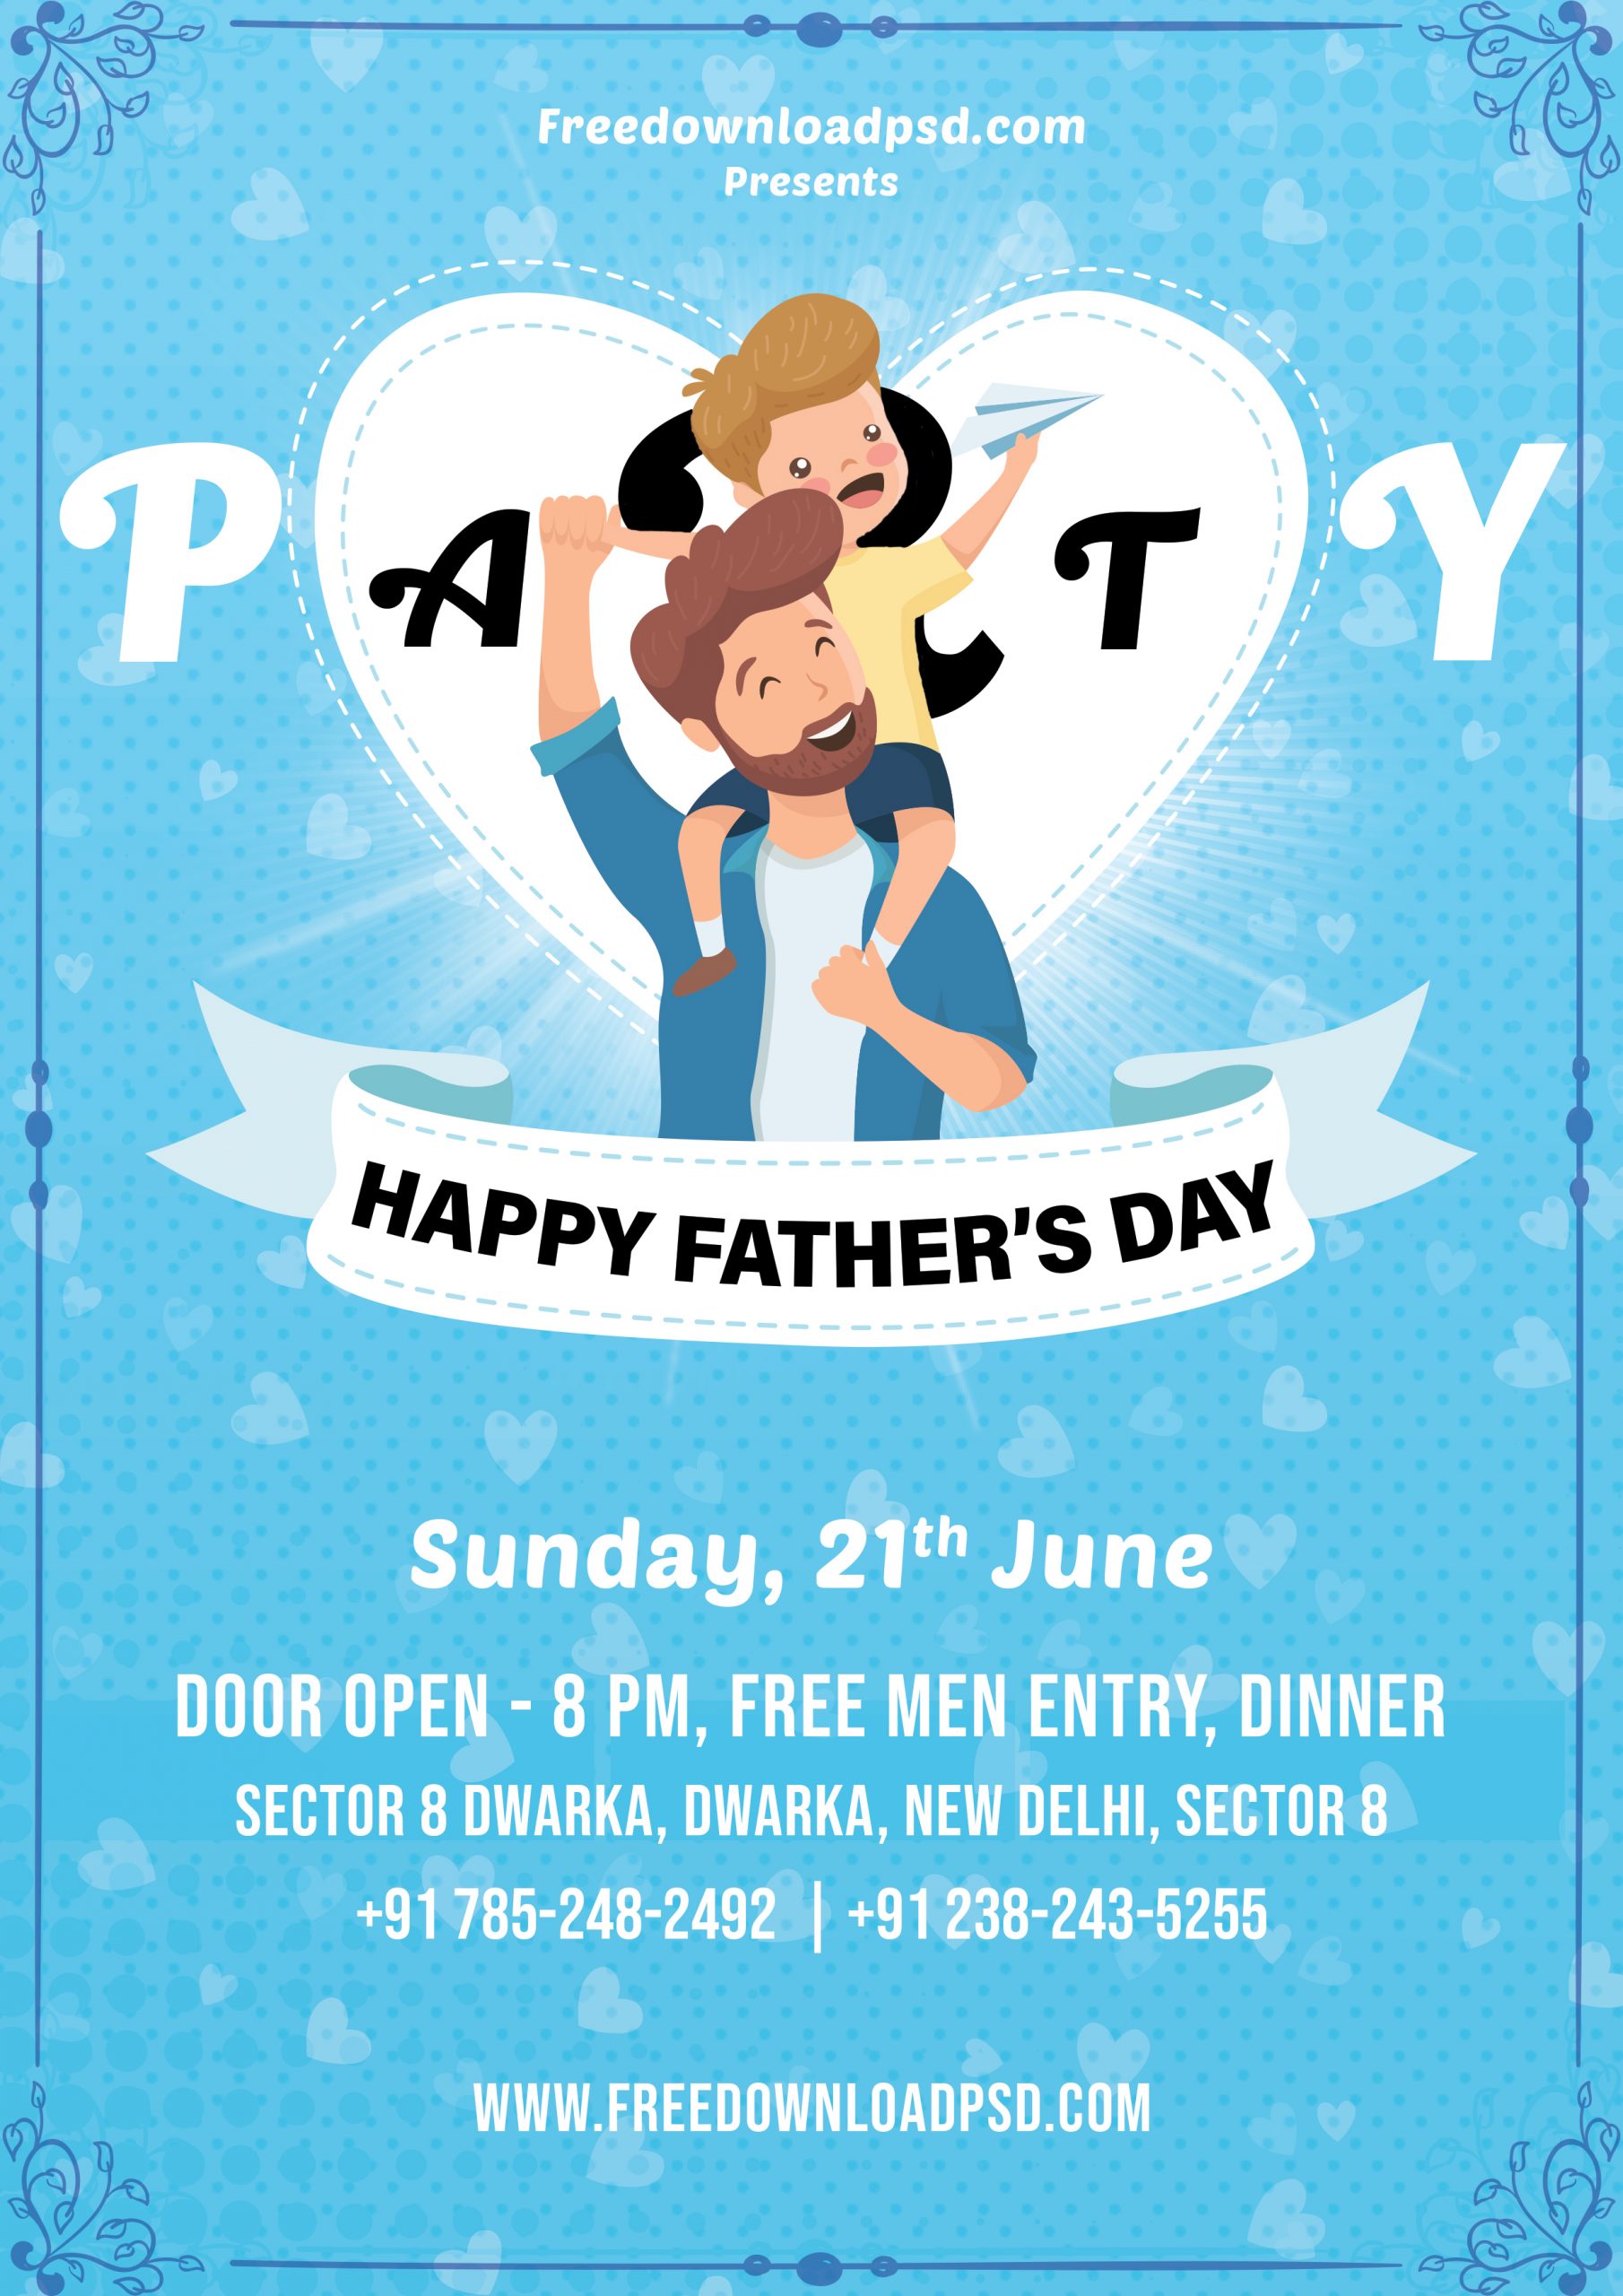 Father’s Day Party Flyer Free PSD